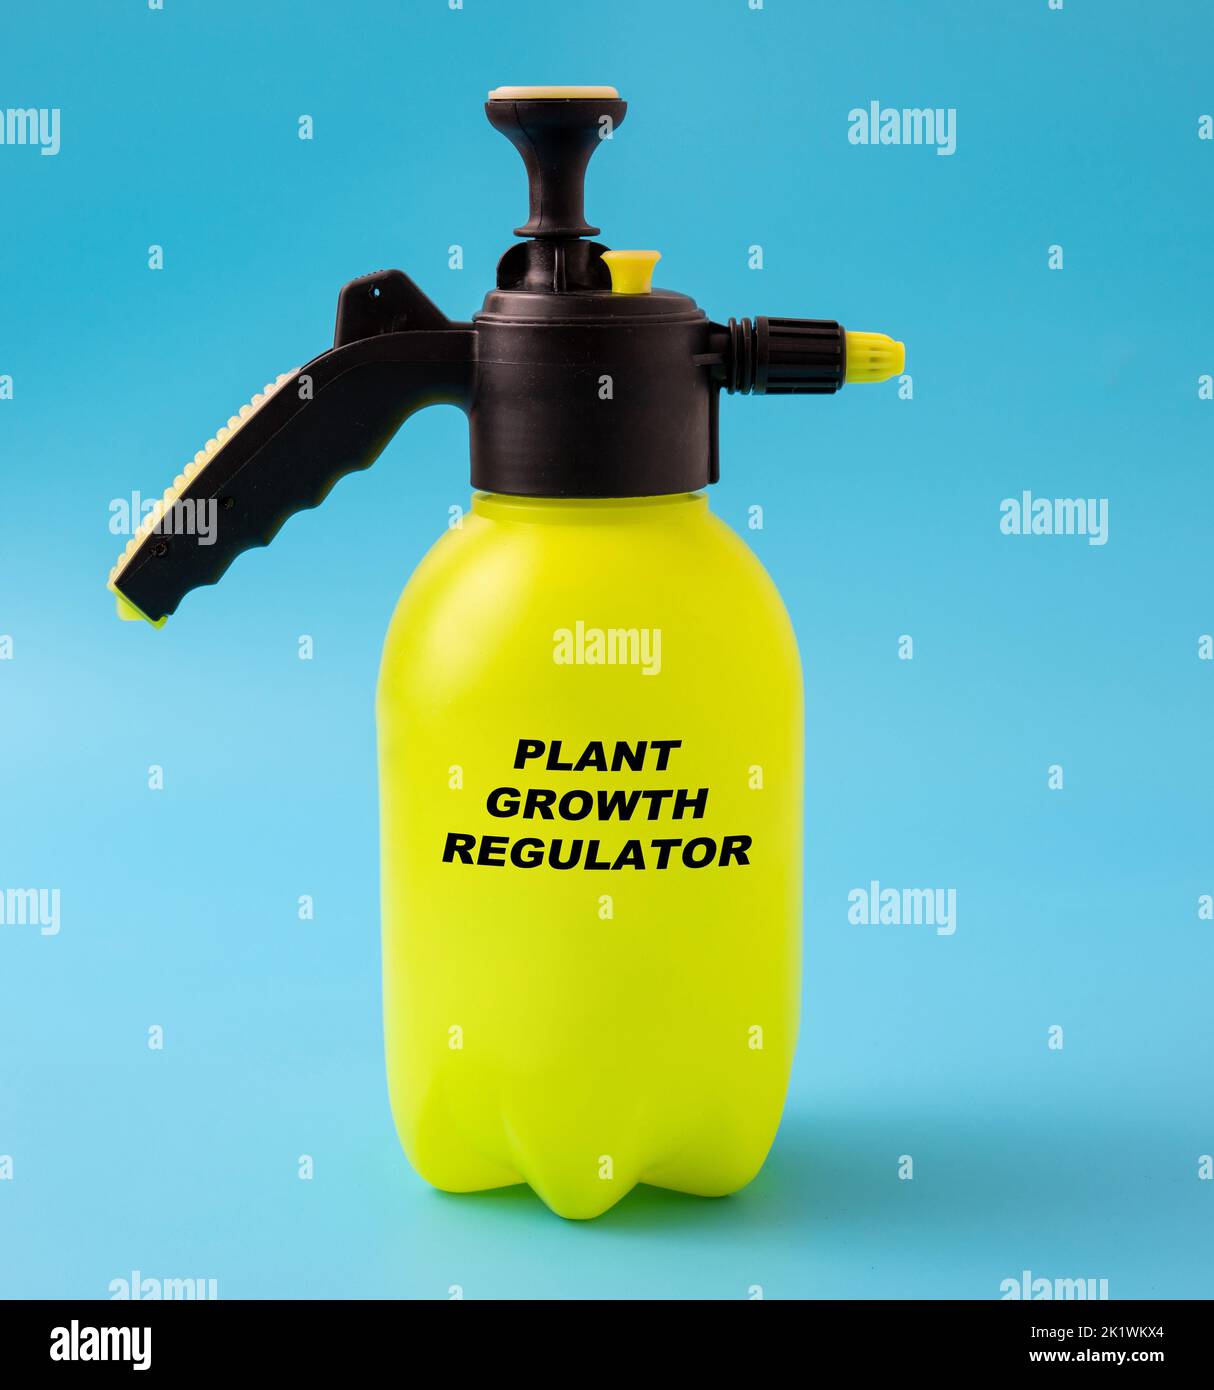 Plant growth regulator in a plastic spray, conceptual image Stock Photo